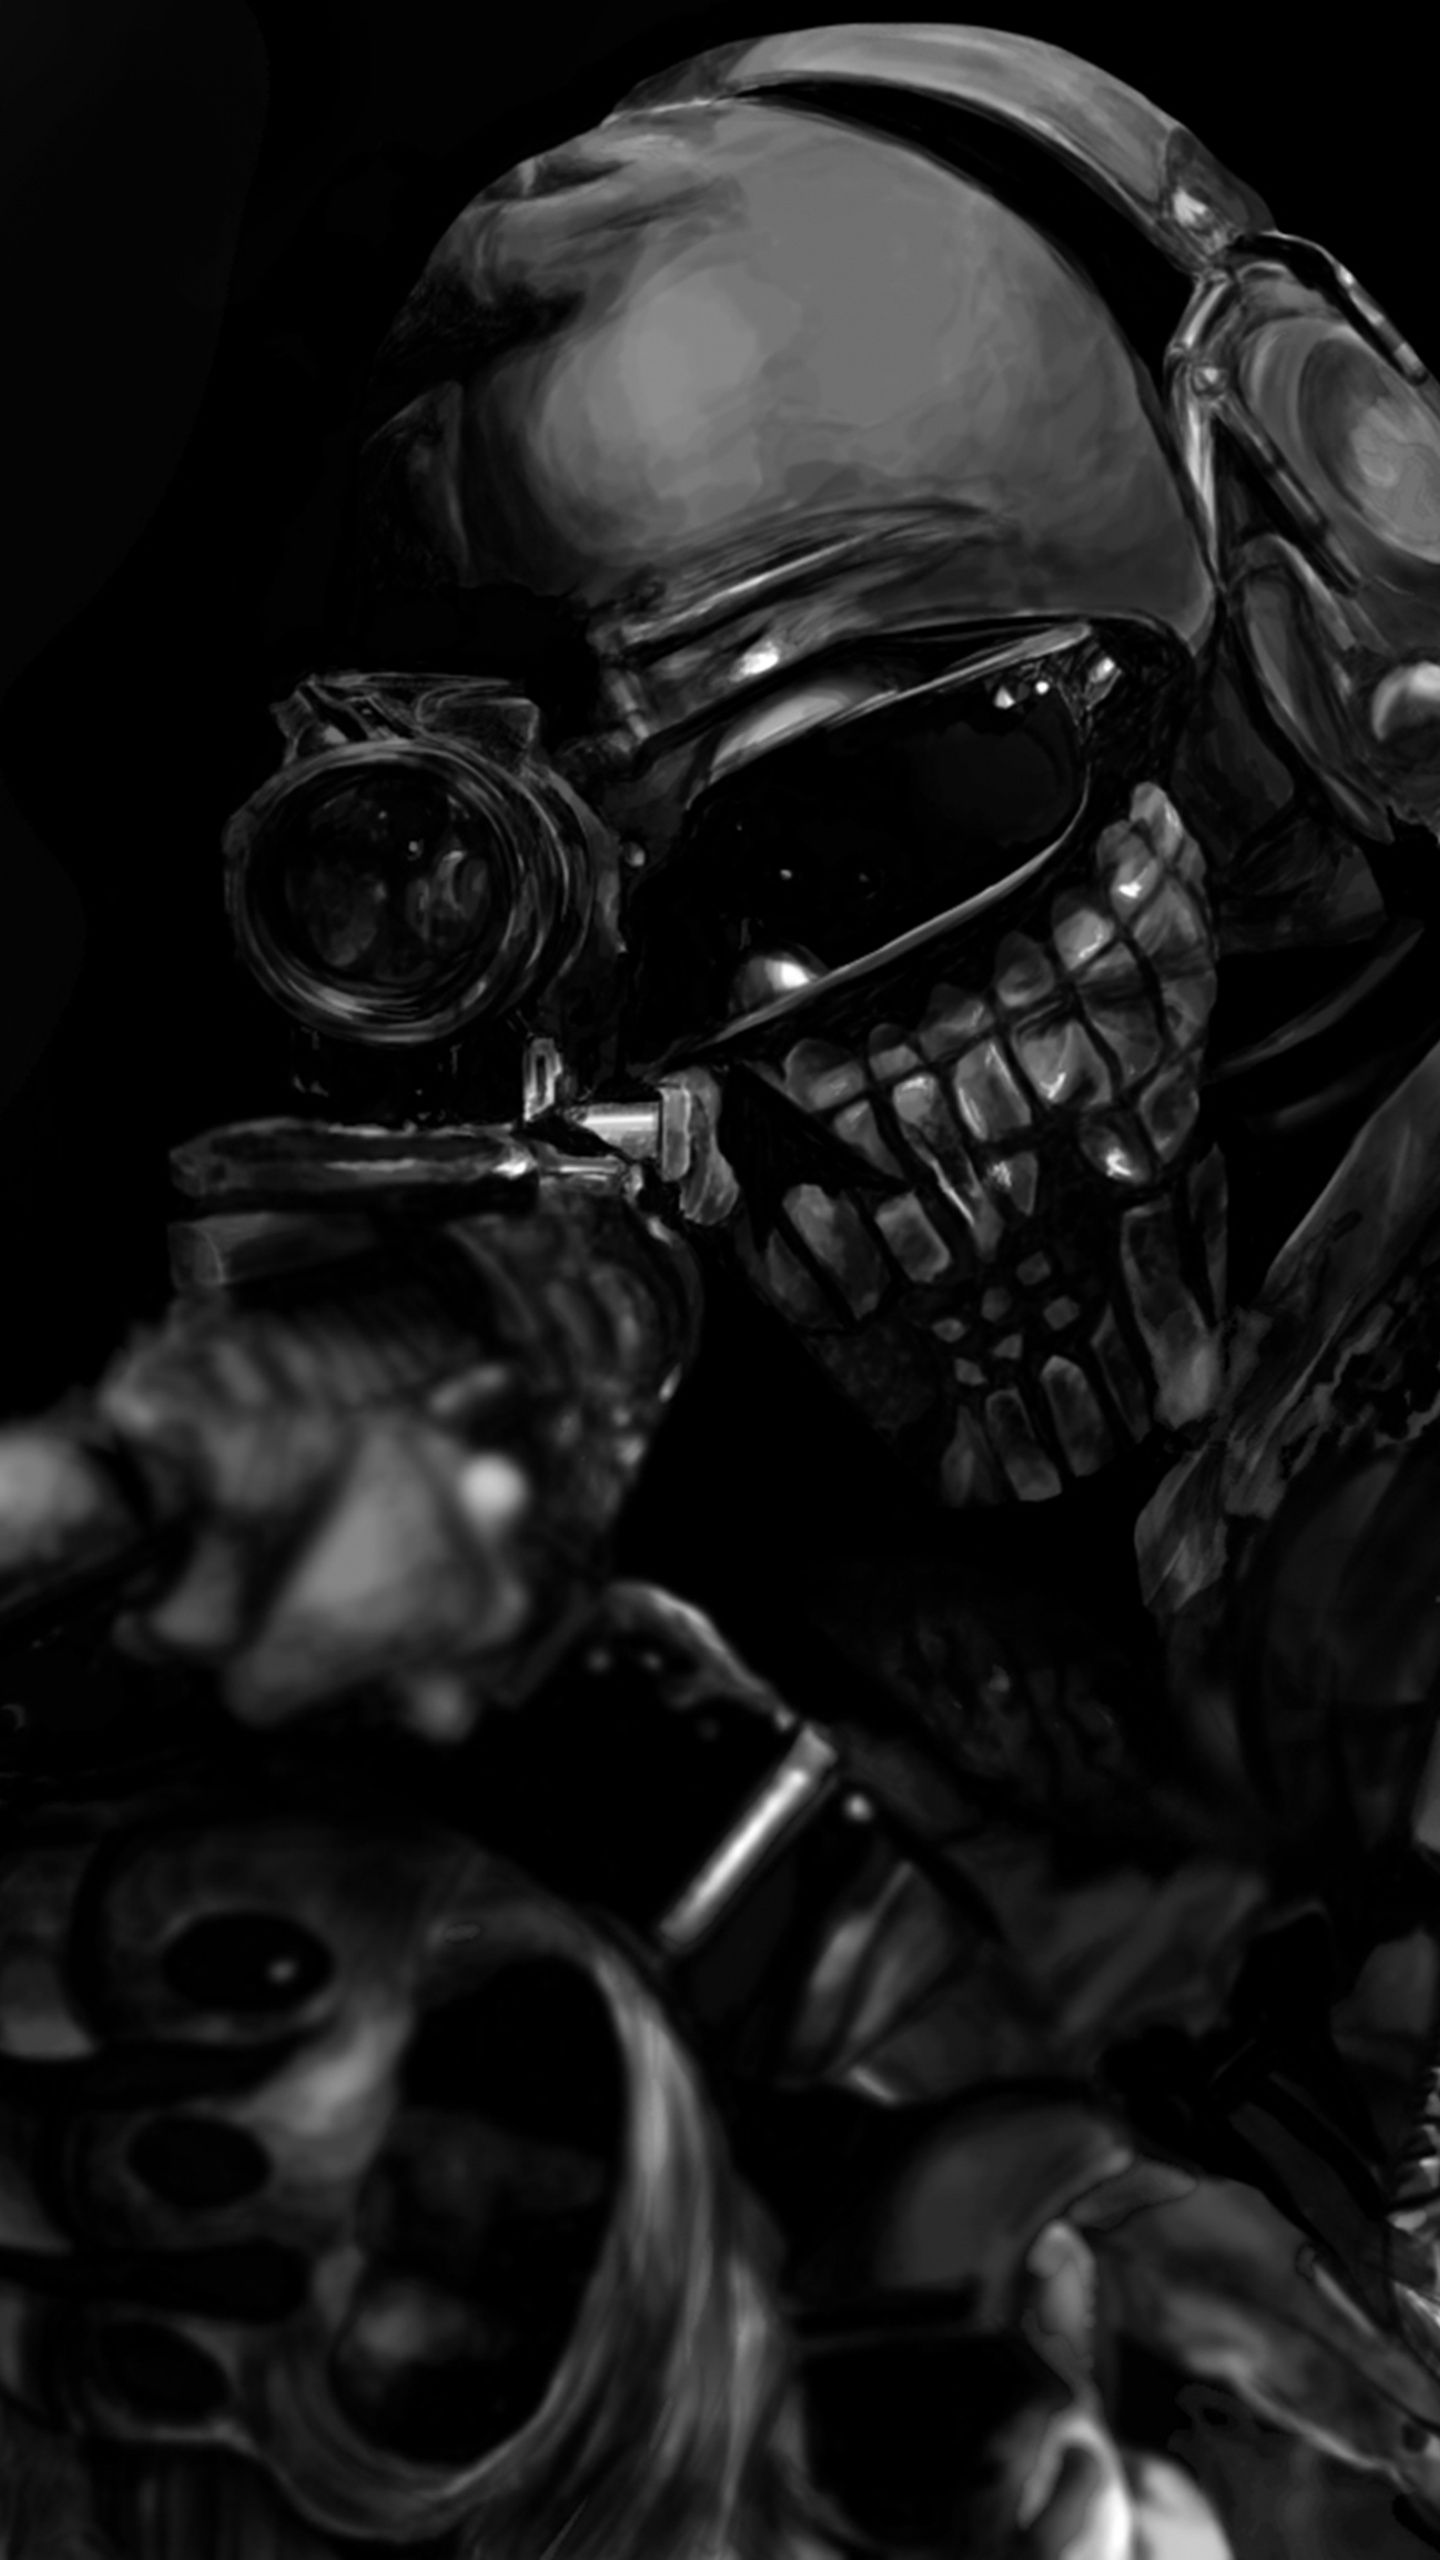 call of duty ghosts iphone 4 wallpaper